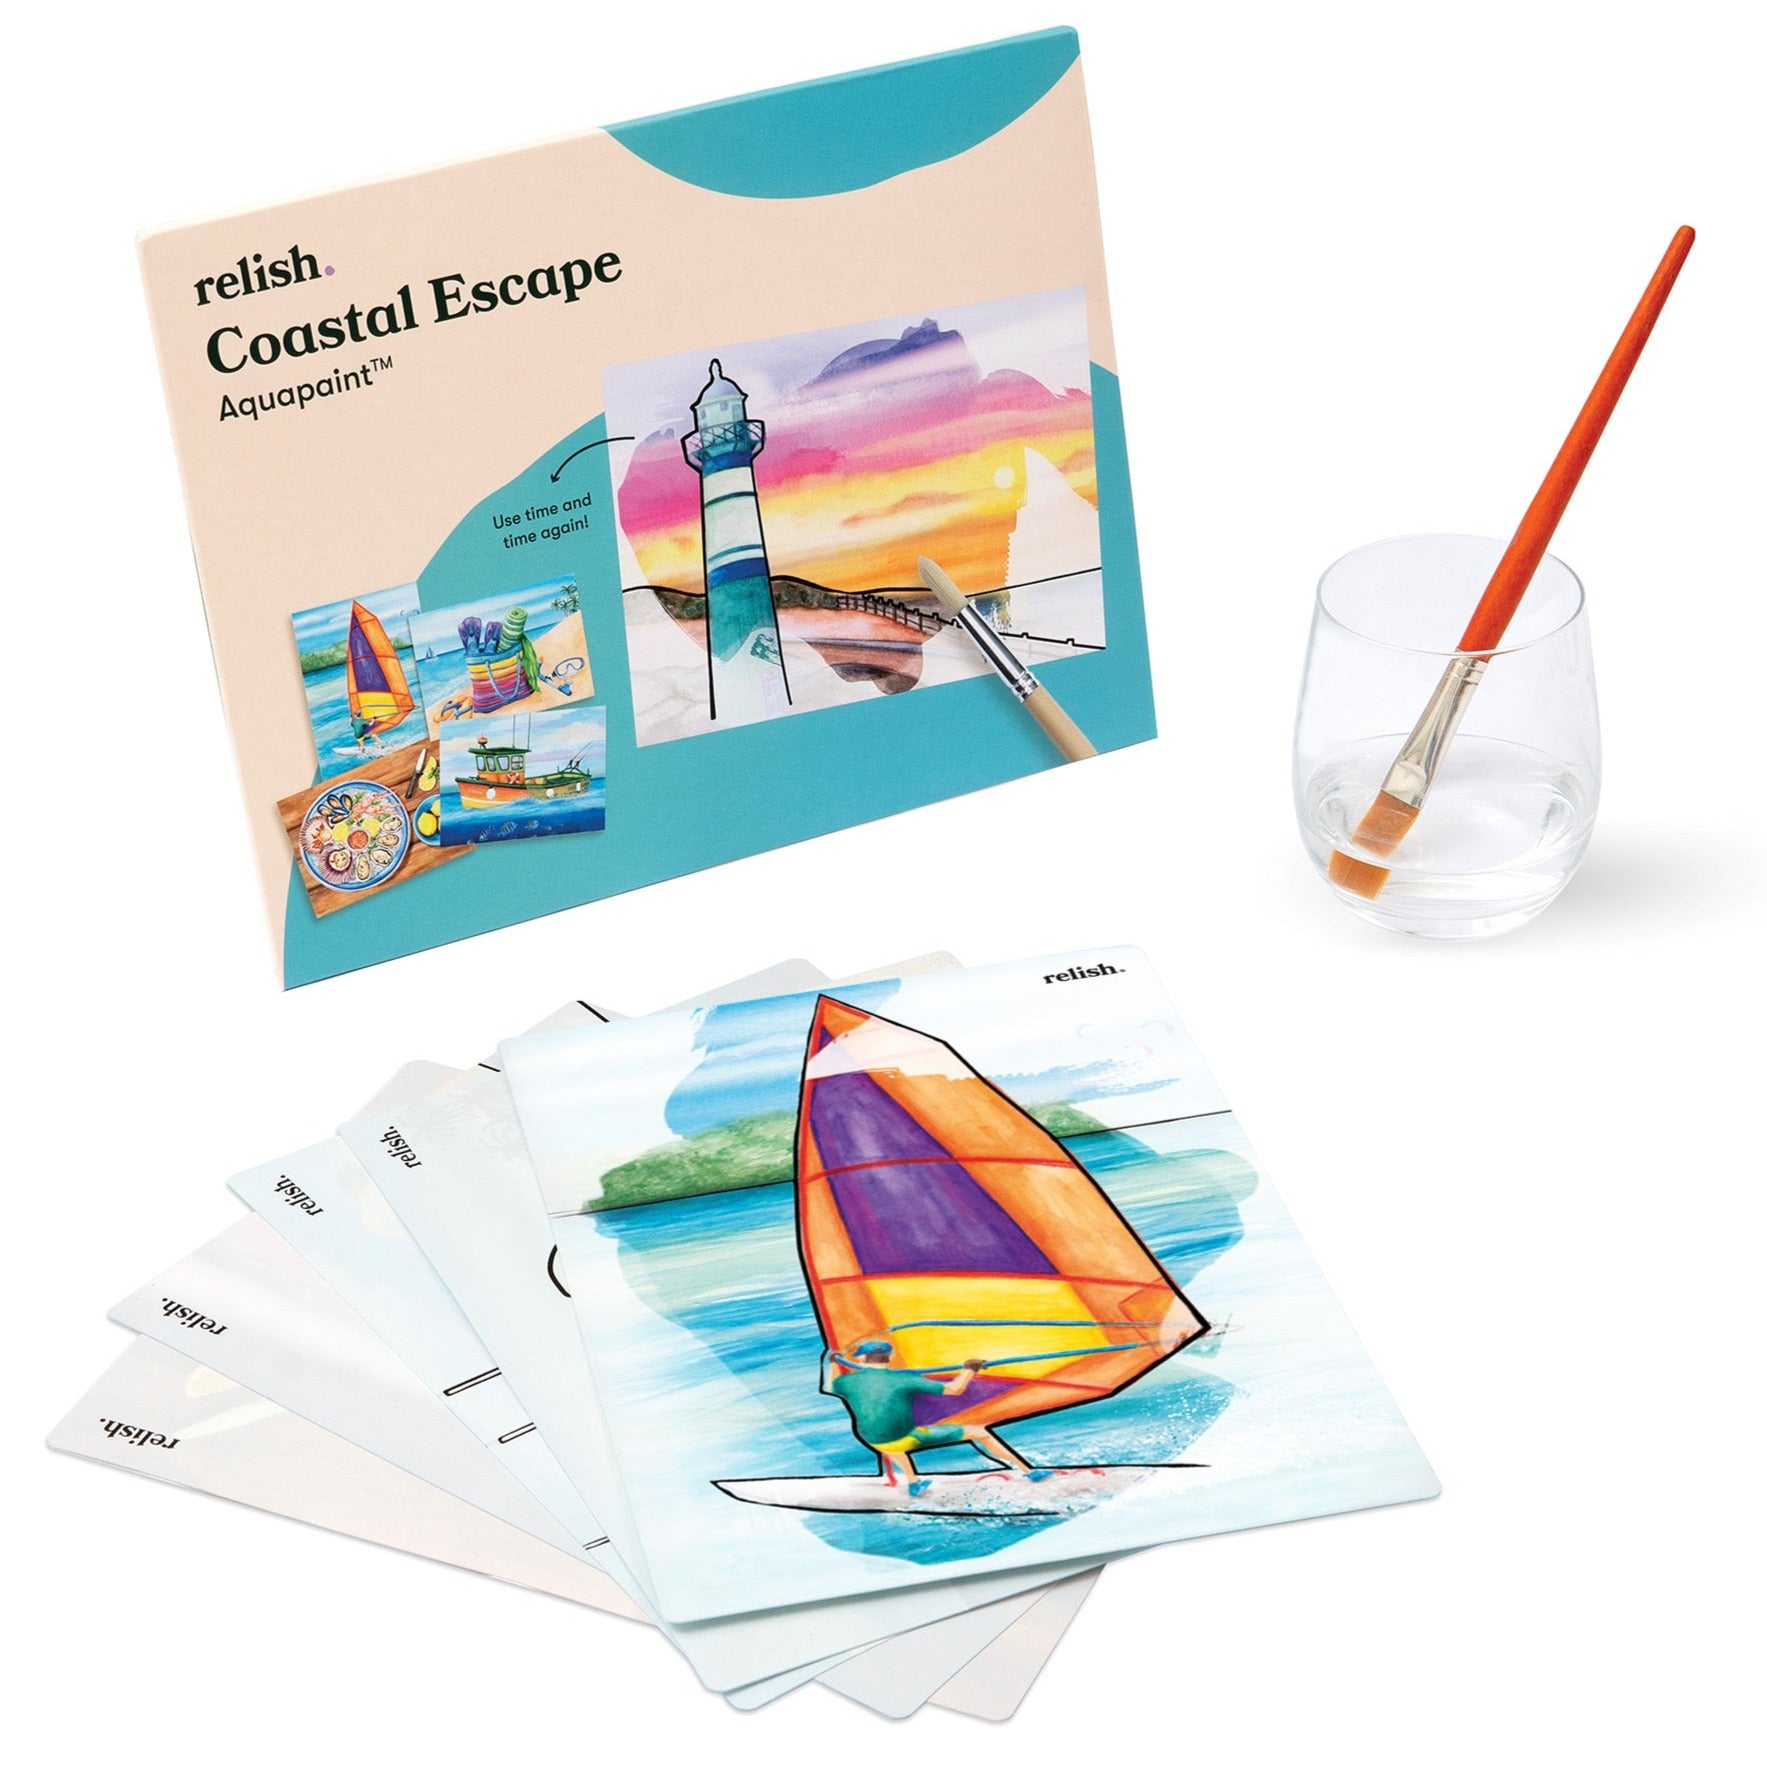 In the top left the front of the product is shown, with title and contents.  Next to this is a clear glass tumbler, in which a red paintbrush sits in some water.  Below, six picture cards from the set are fanned out, with the top one entirely visible, showing a windsurfer that has been brightly coloured in.